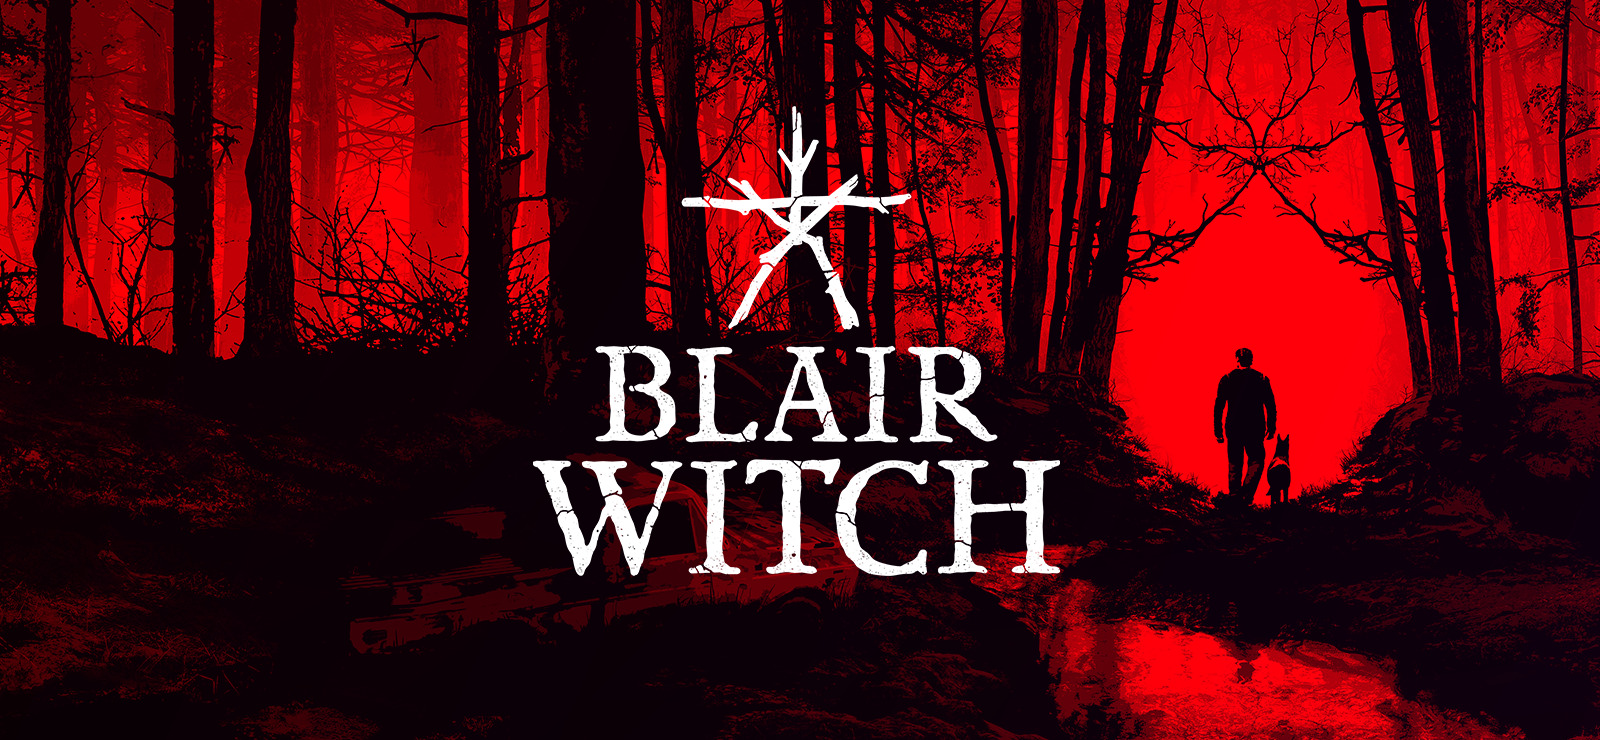 the blair witch project 2016 online free